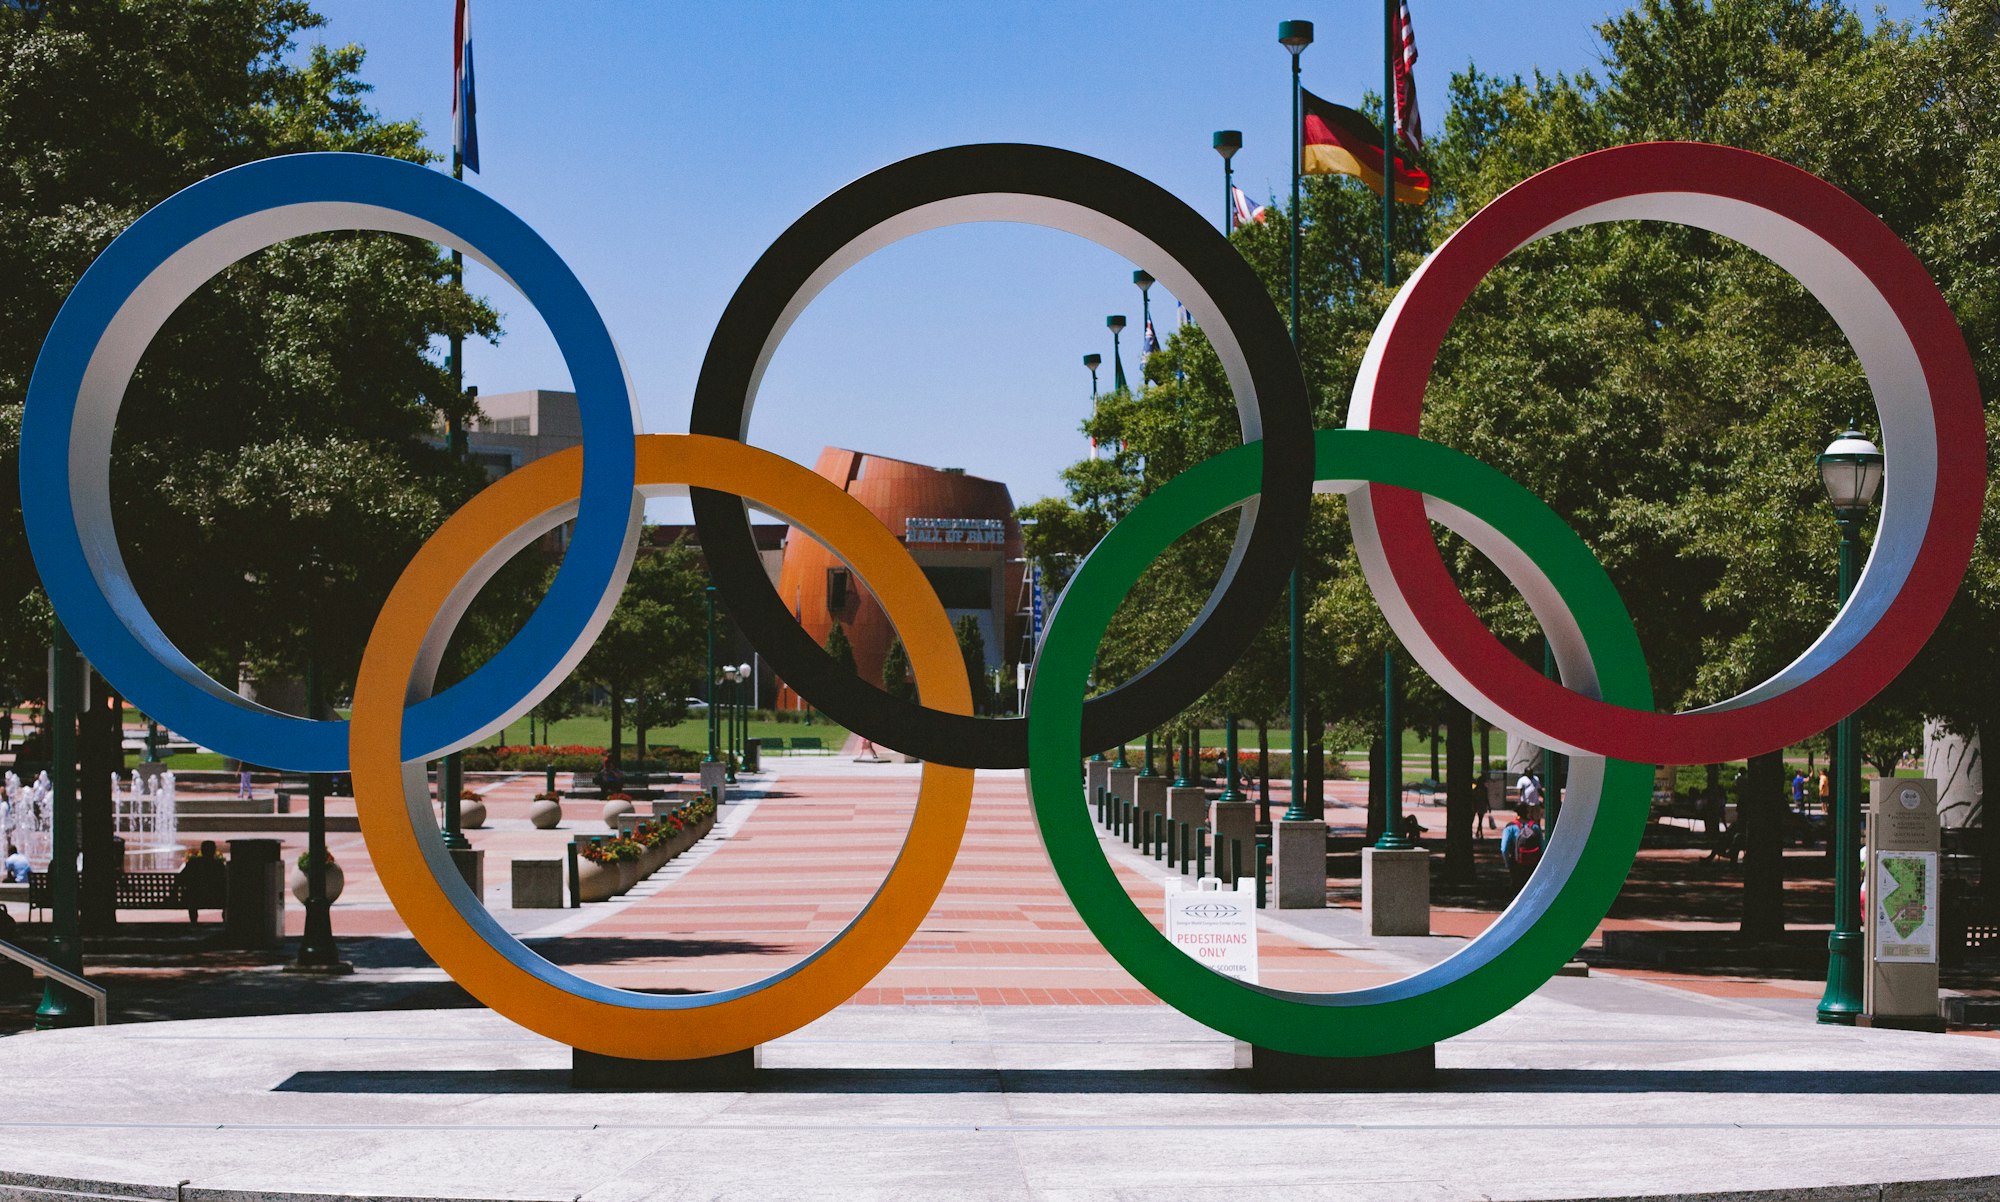 Which State Was The First To Host The Olympics?